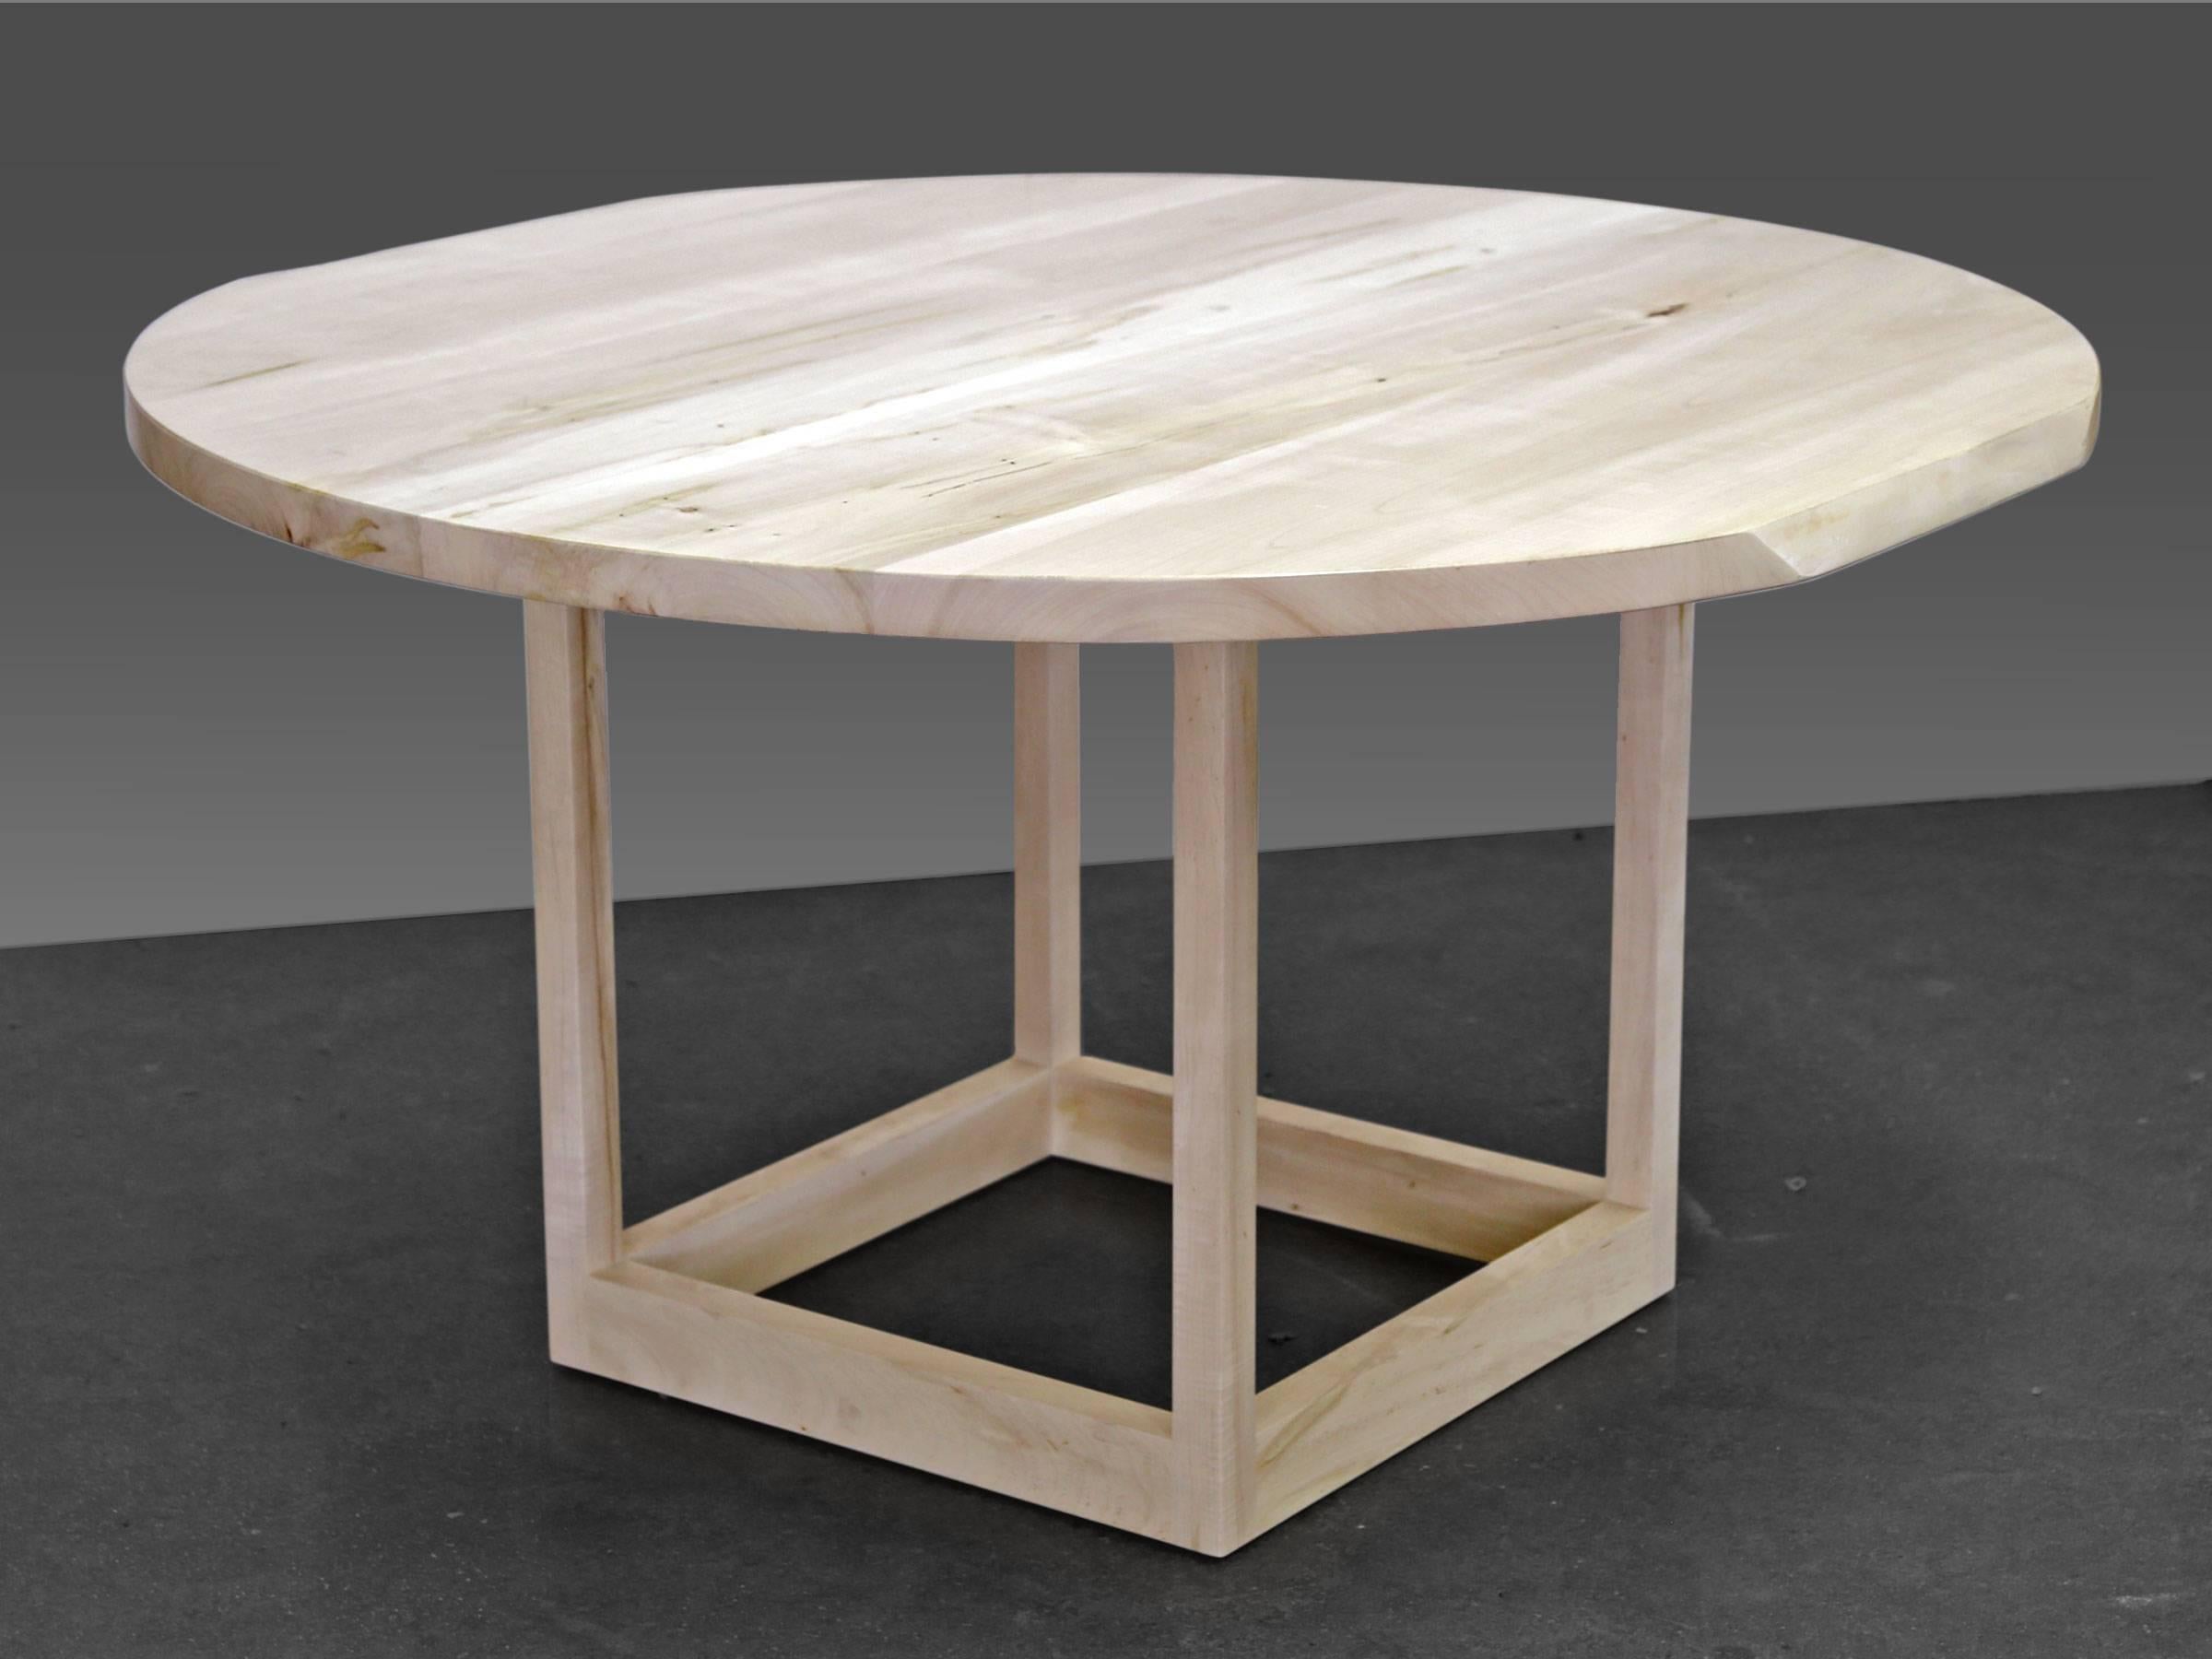 Many people have asked us to develop a live edge table that incorporates a round top and a pedestal base. Our response is the flow pedestal table, shown here in bleached ambrosia maple with a hardwood frame base. The table has subtle live edge